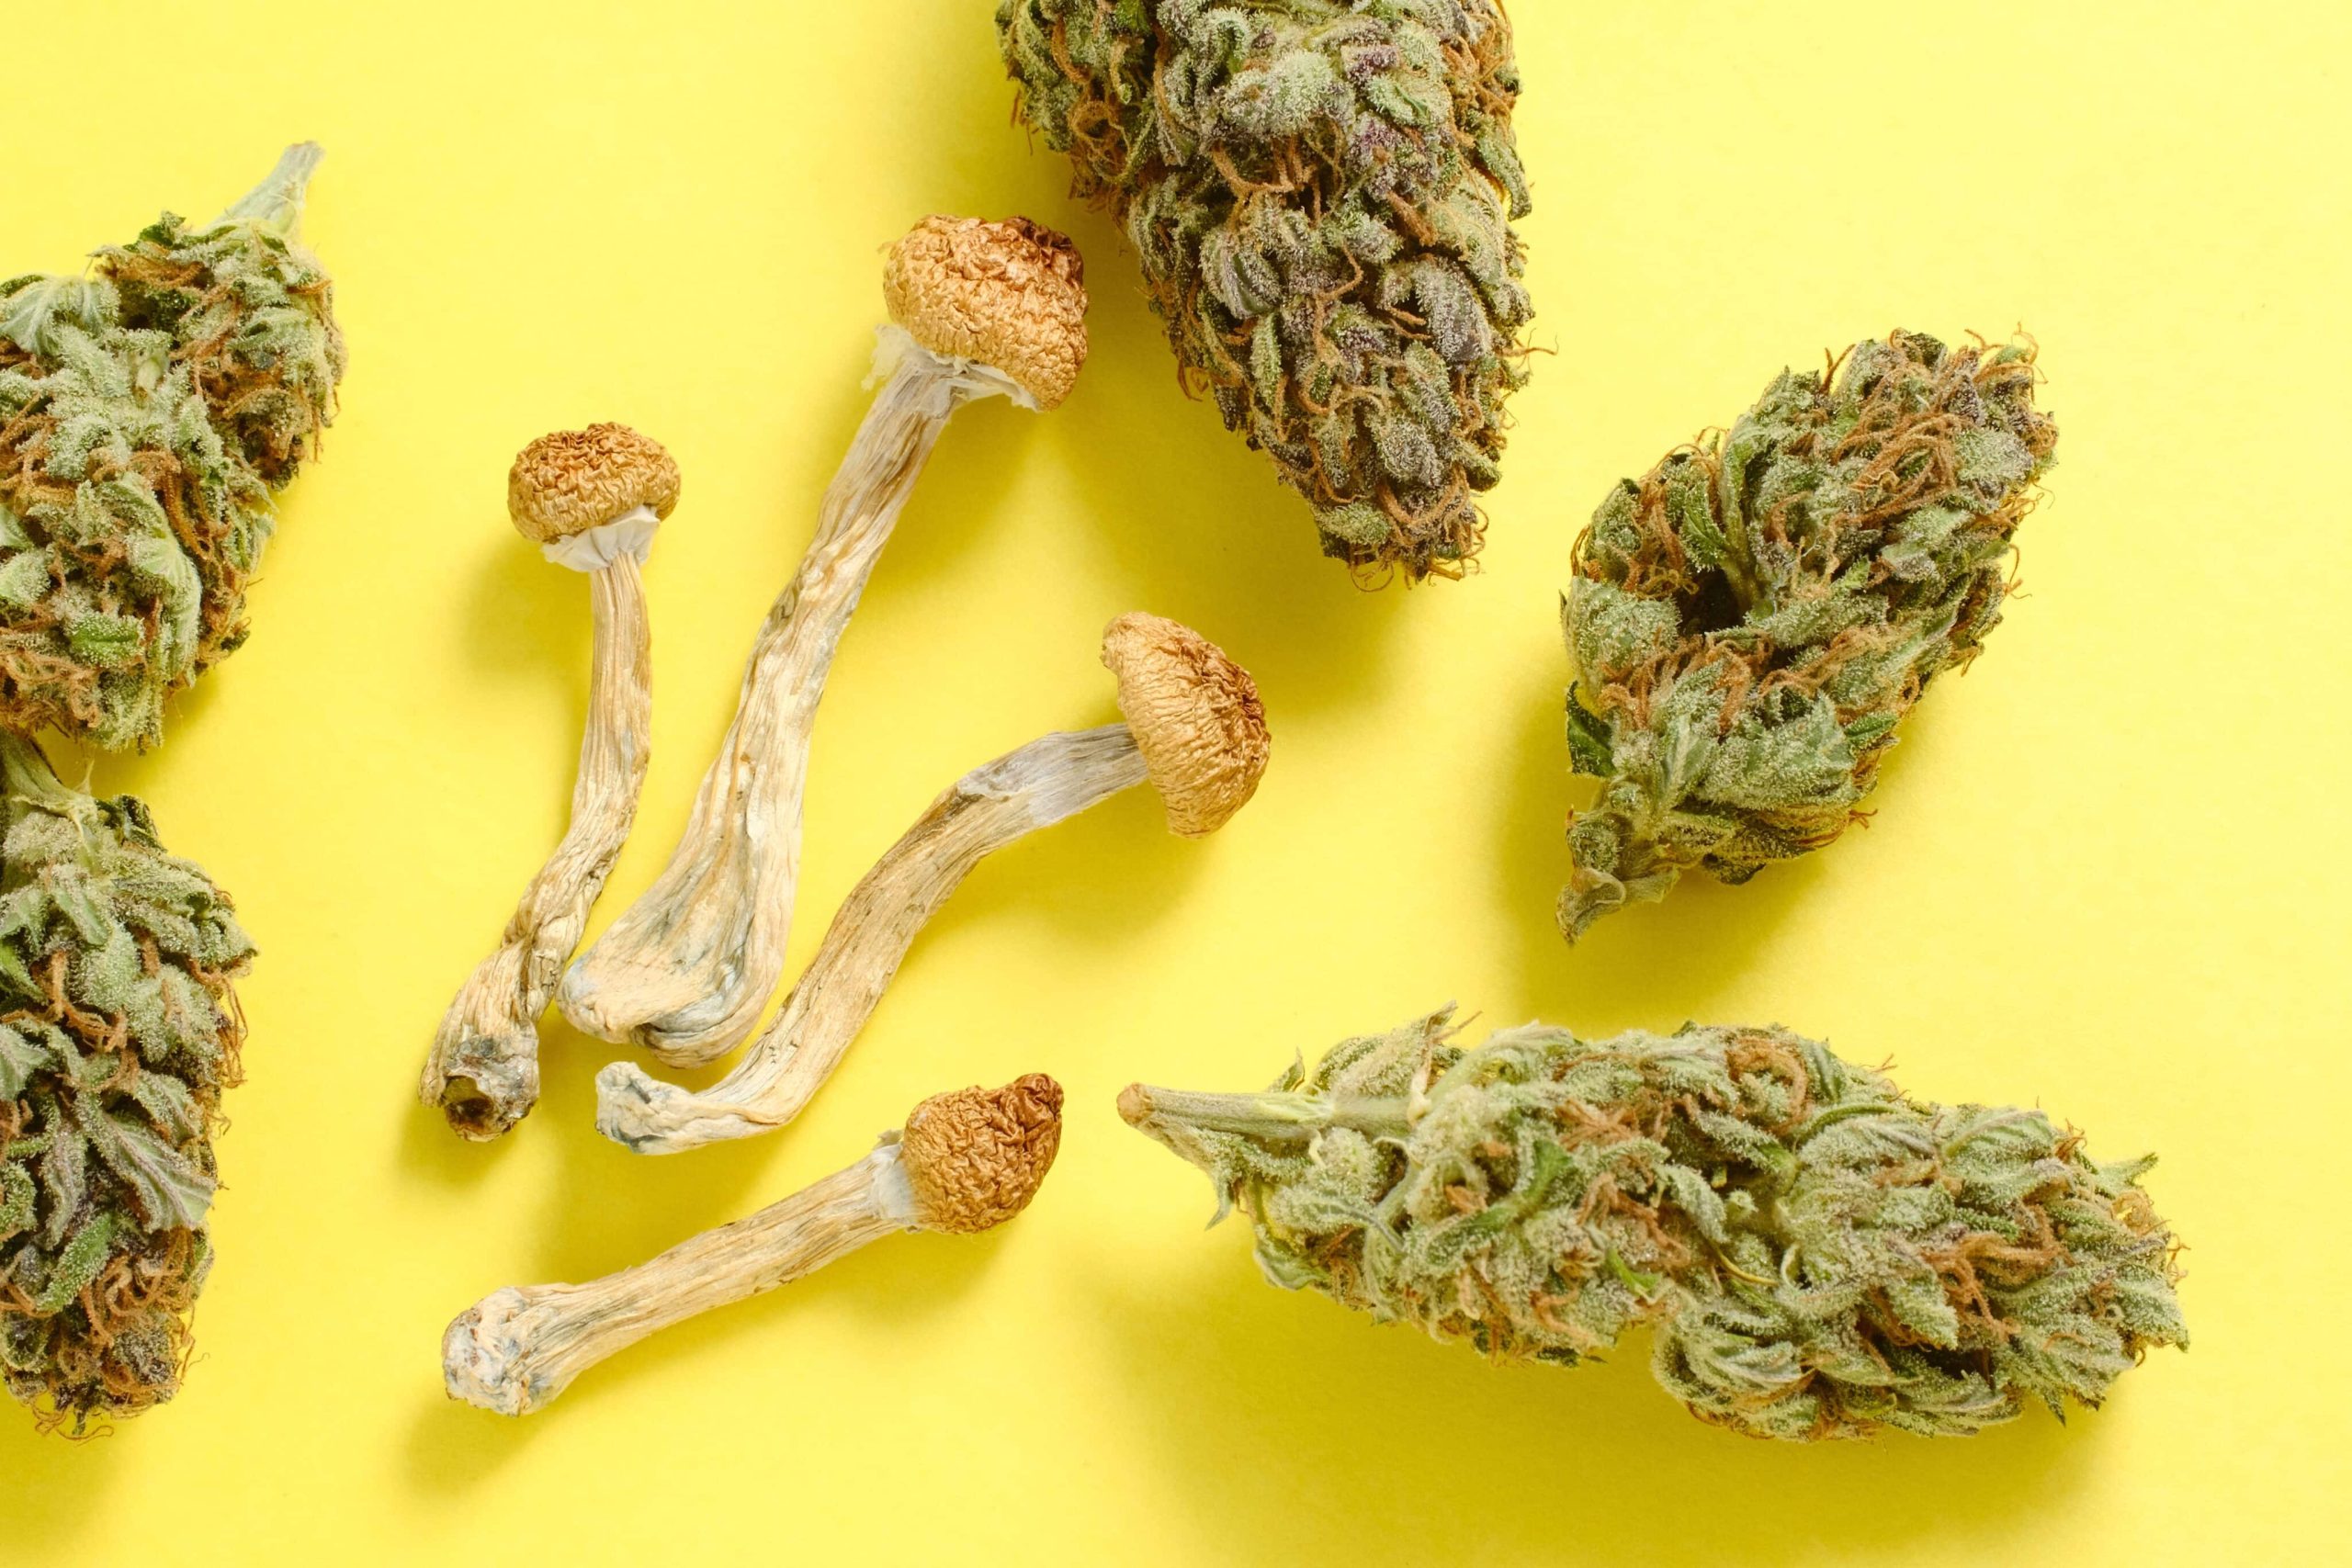 Researchers Aim To Combine Psilocybin and Cannabis Into Single Medical Treatment